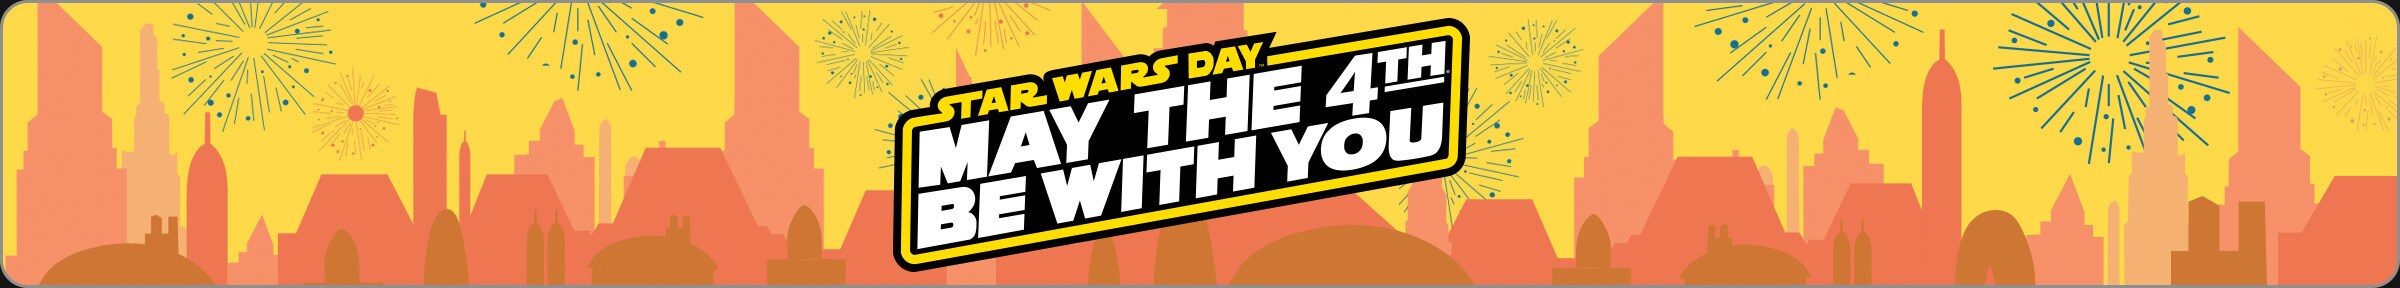 Star Wars Day banner - May the 4th Be With You